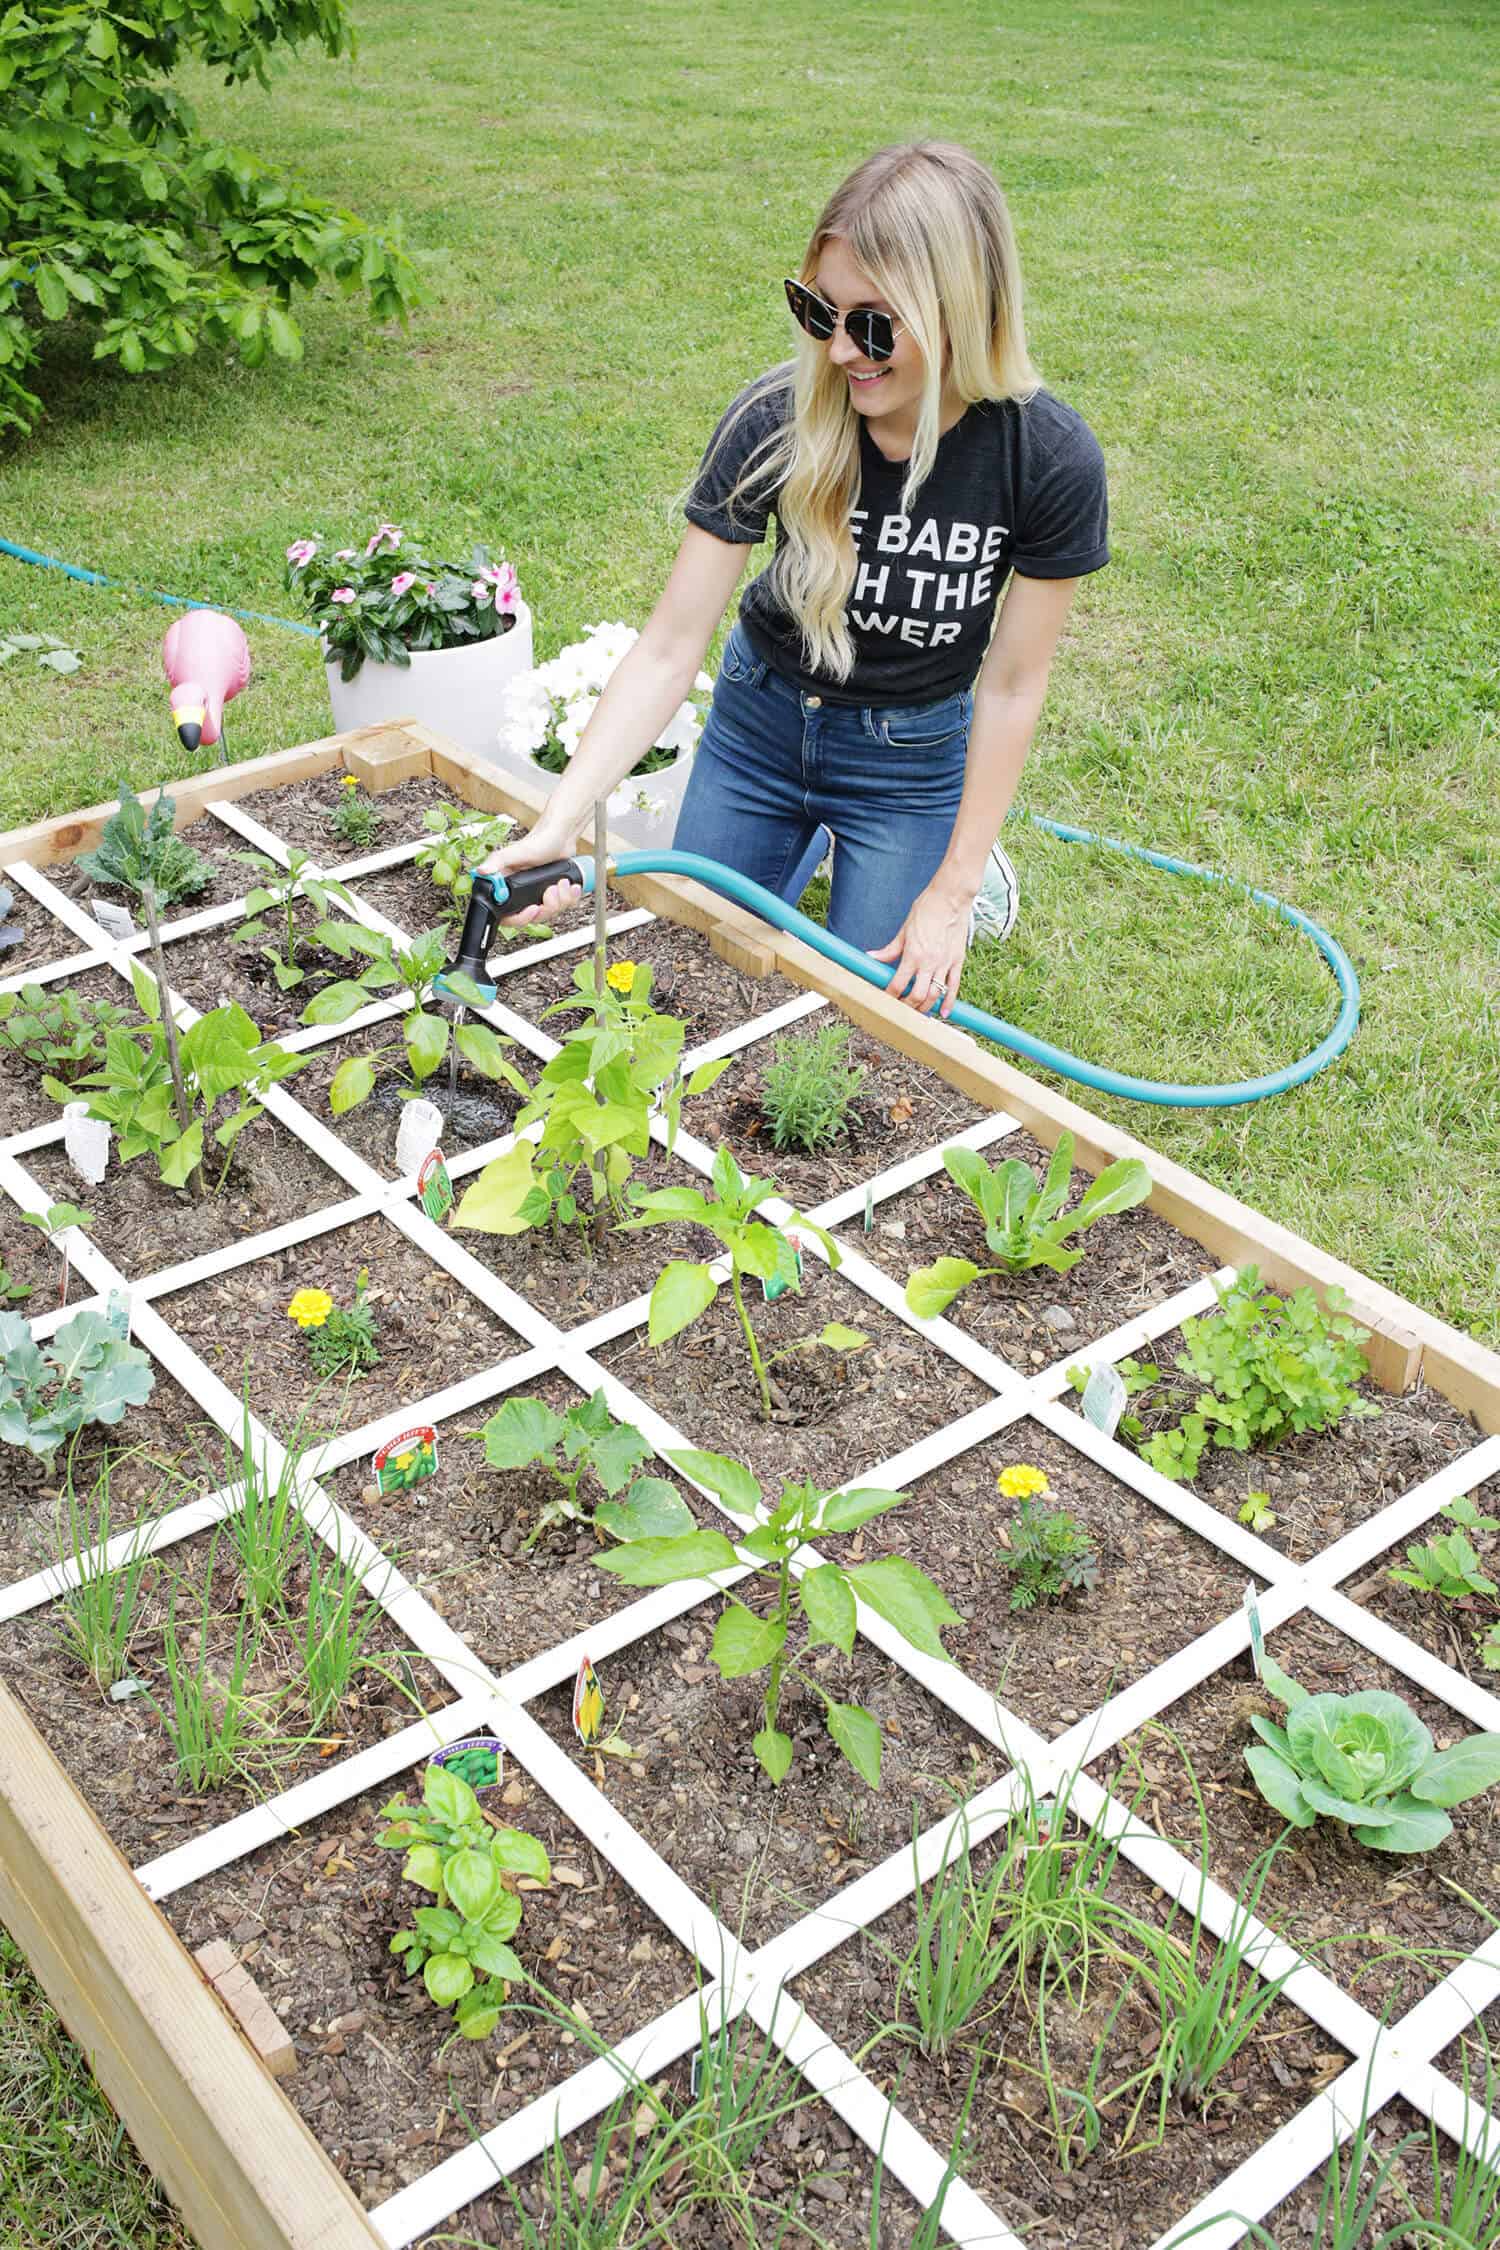 Make Your Own Raised Garden Bed in 4 Easy Steps! - A ...